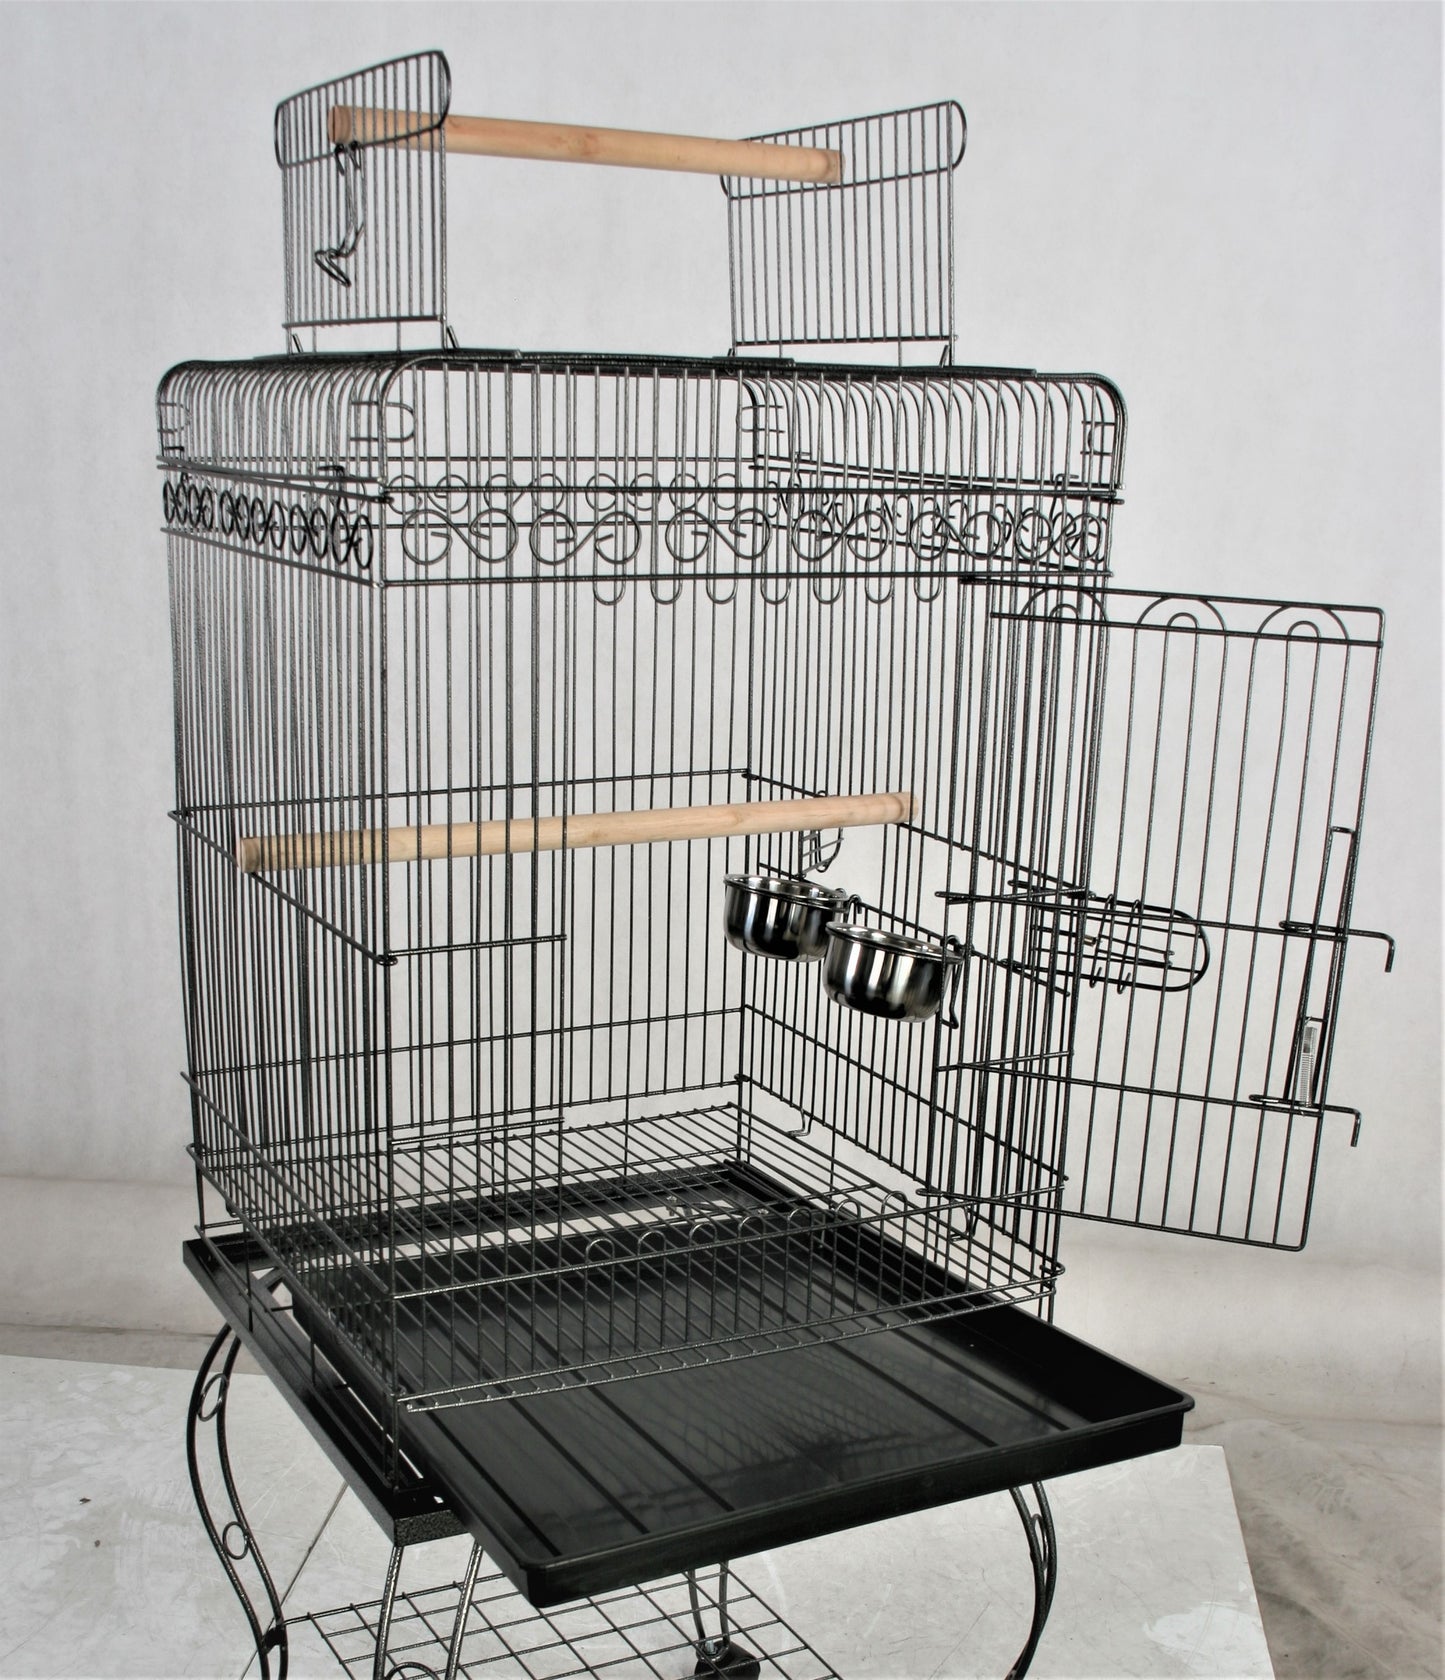 Flat Top Bird Cage Aviary Travel Stand for Budgie Parrot Pet